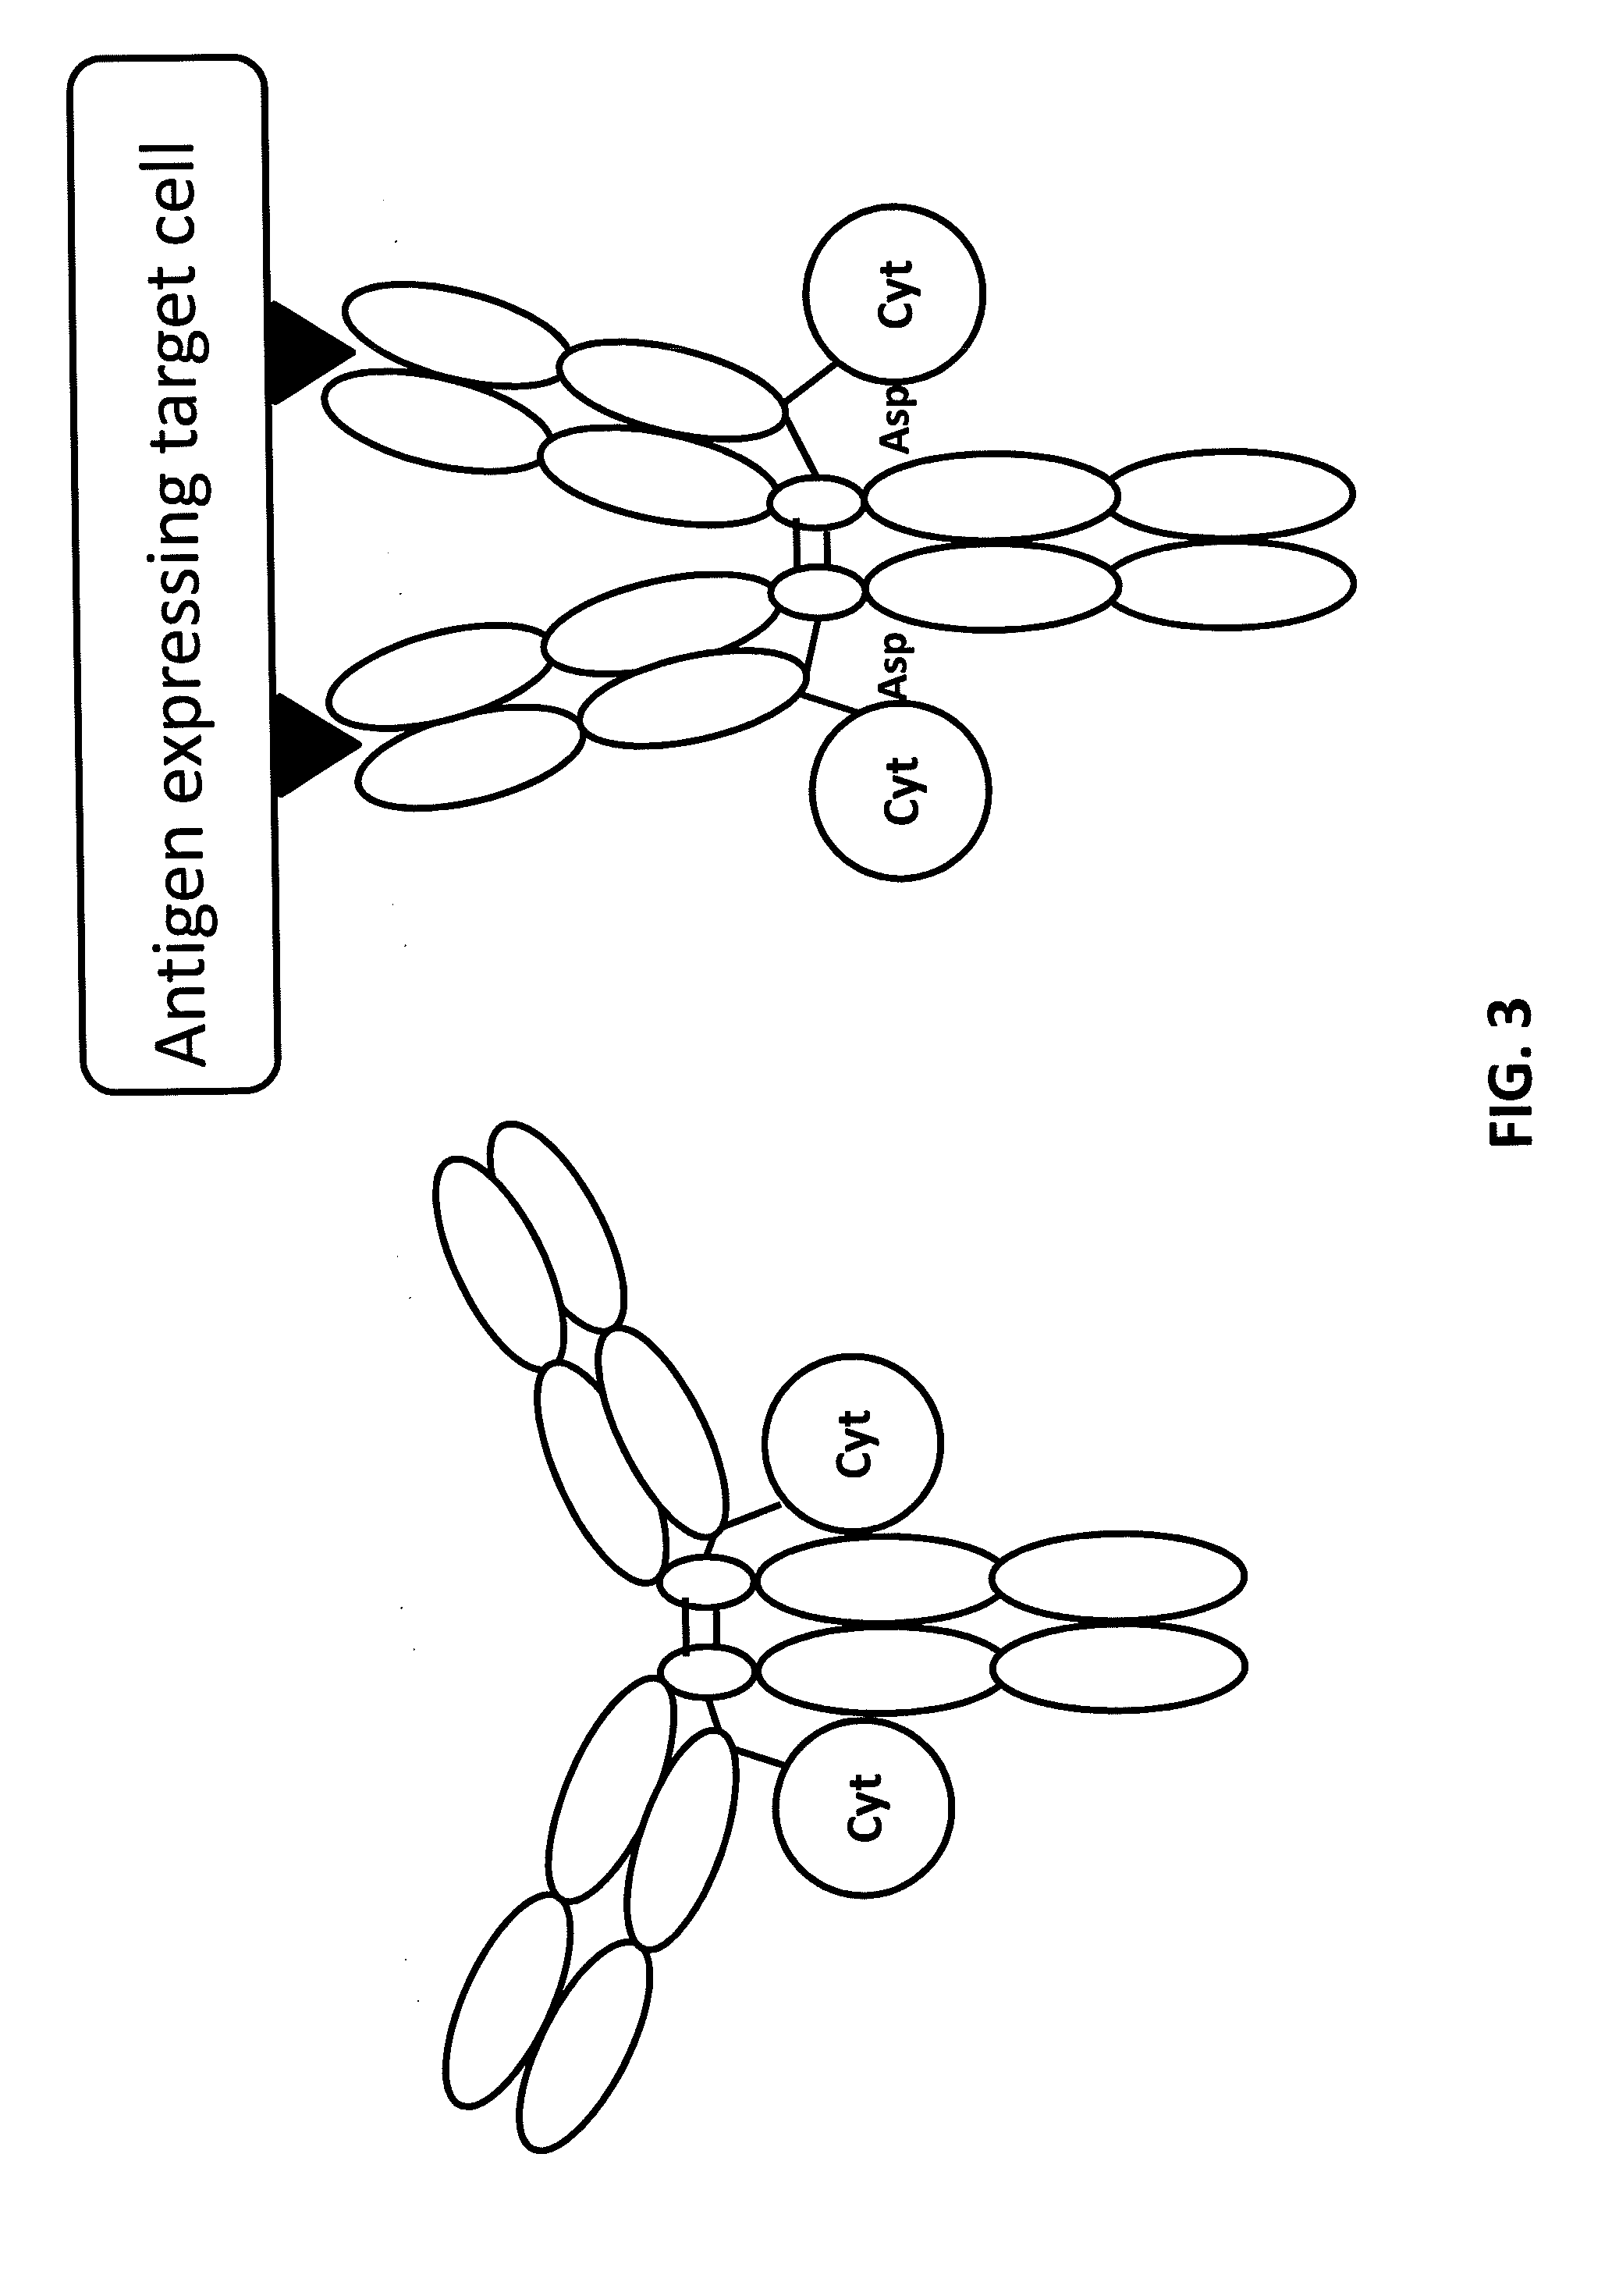 Light chain immunoglobulin fusion proteins and methods of use thereof